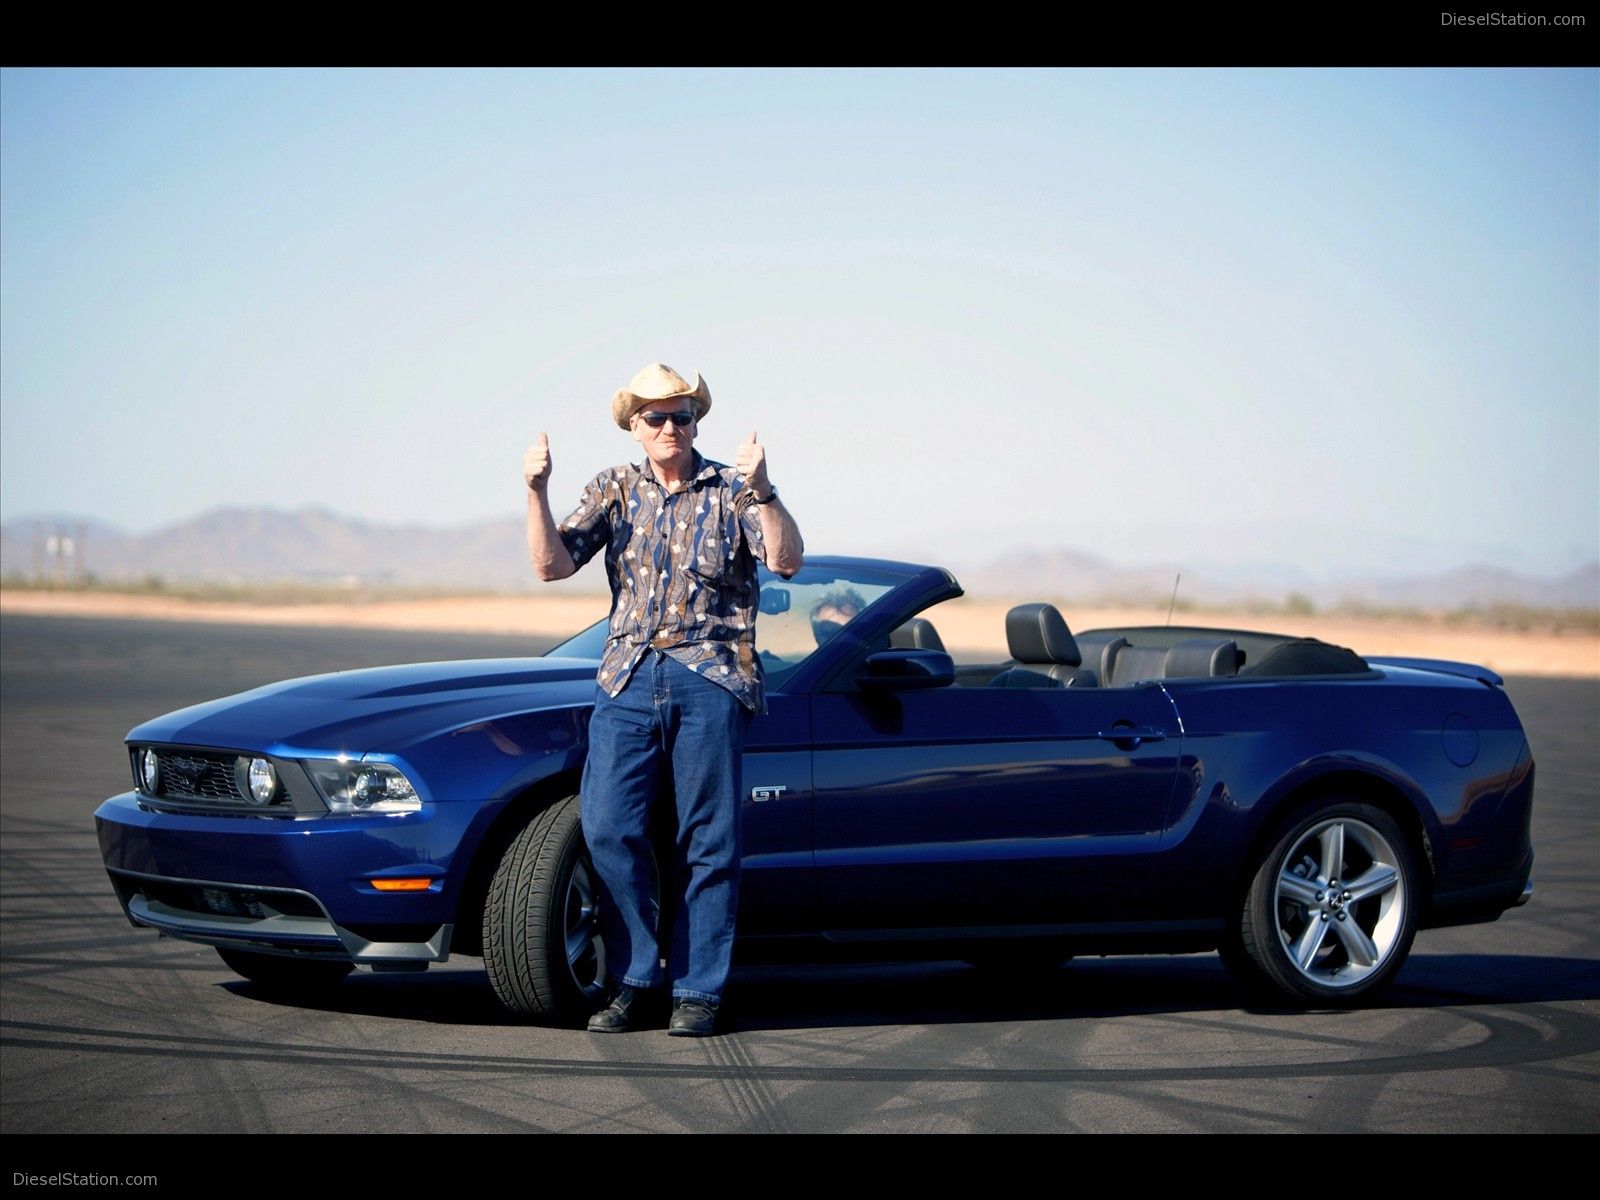 Visually Impaired Man Drives 2010 Ford Mustang Exotic Car